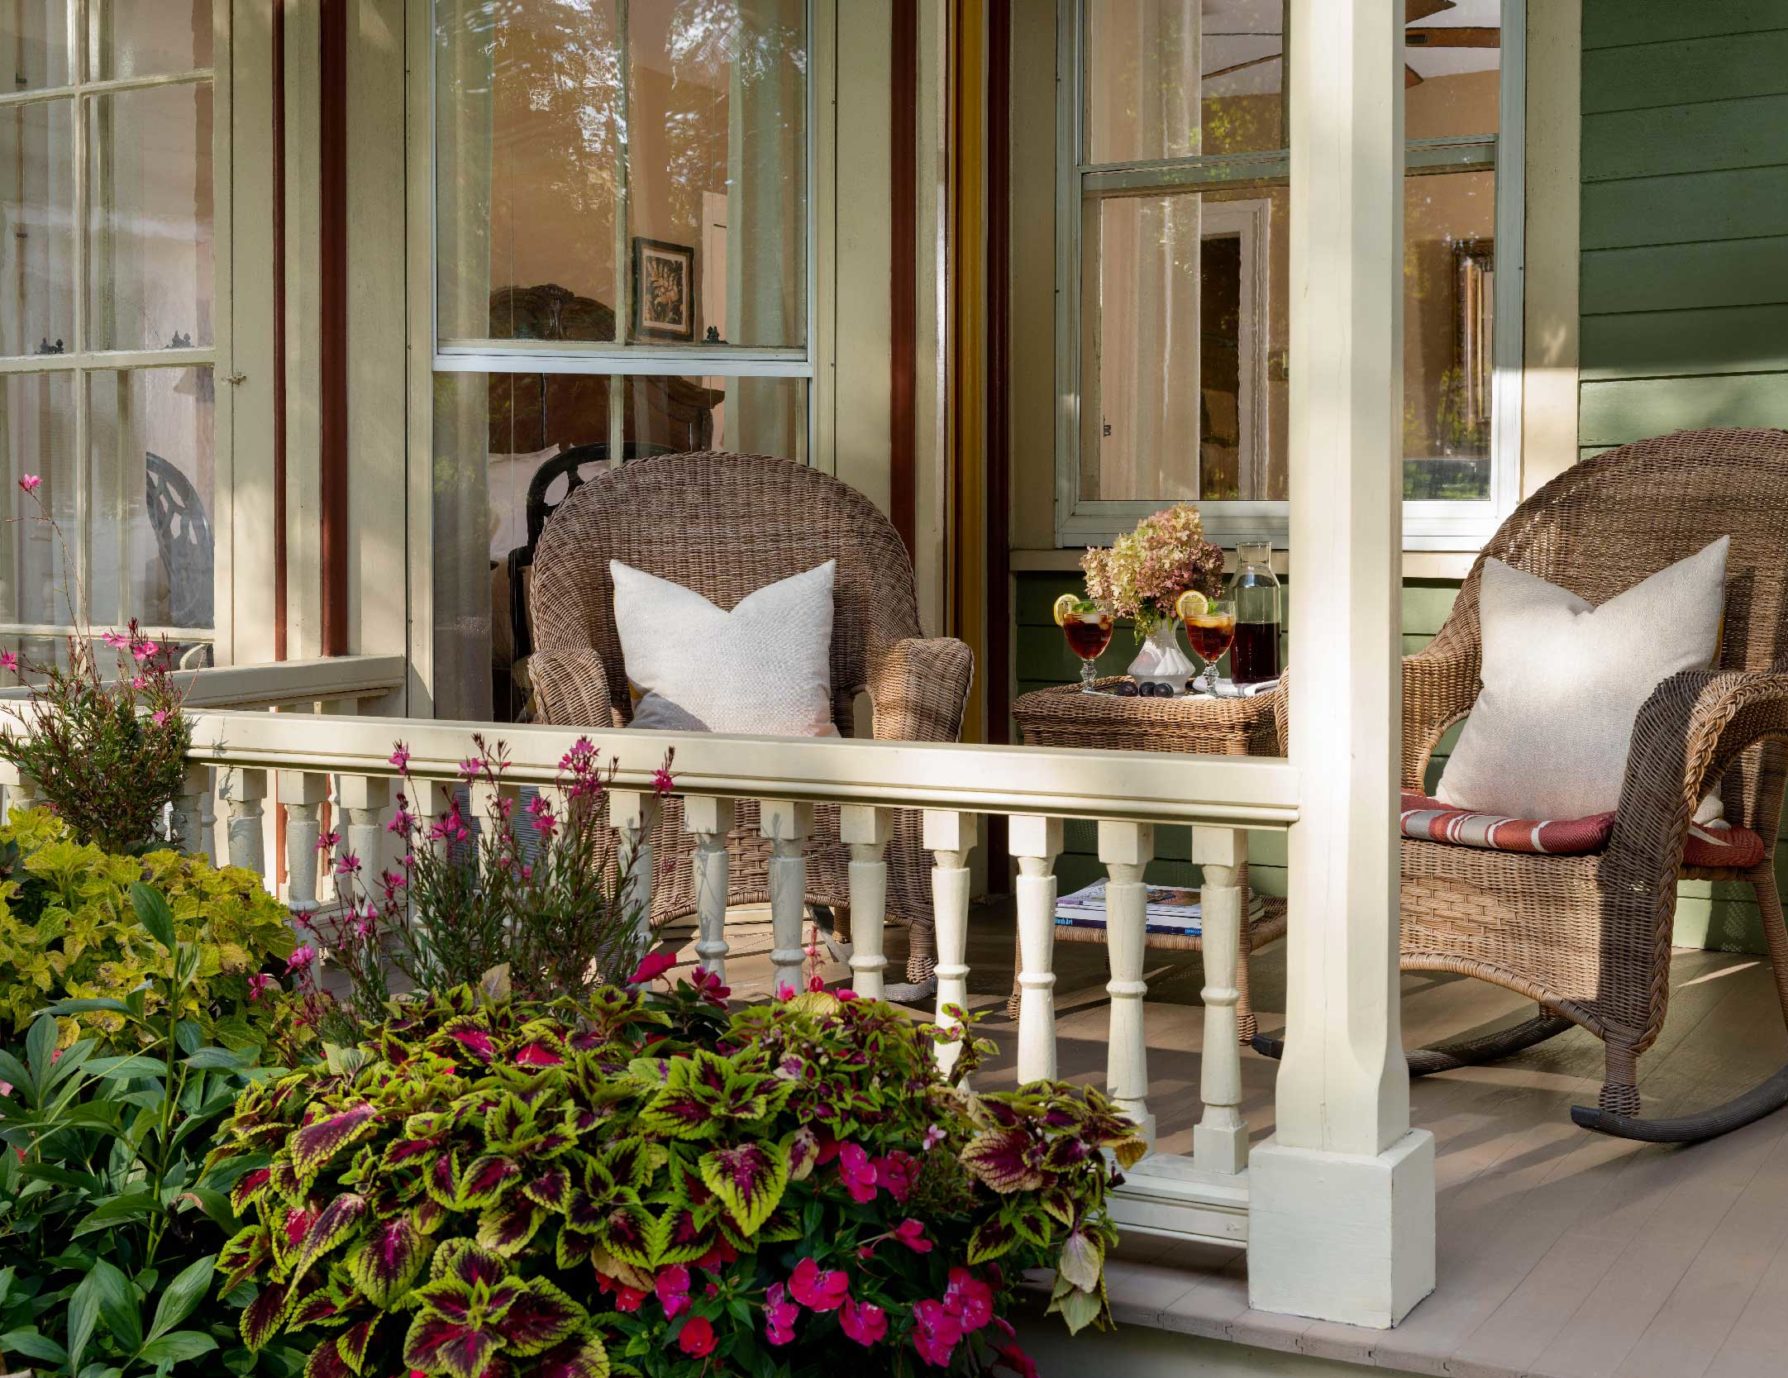 Porch outside of Chance room with wicker rocking chairs